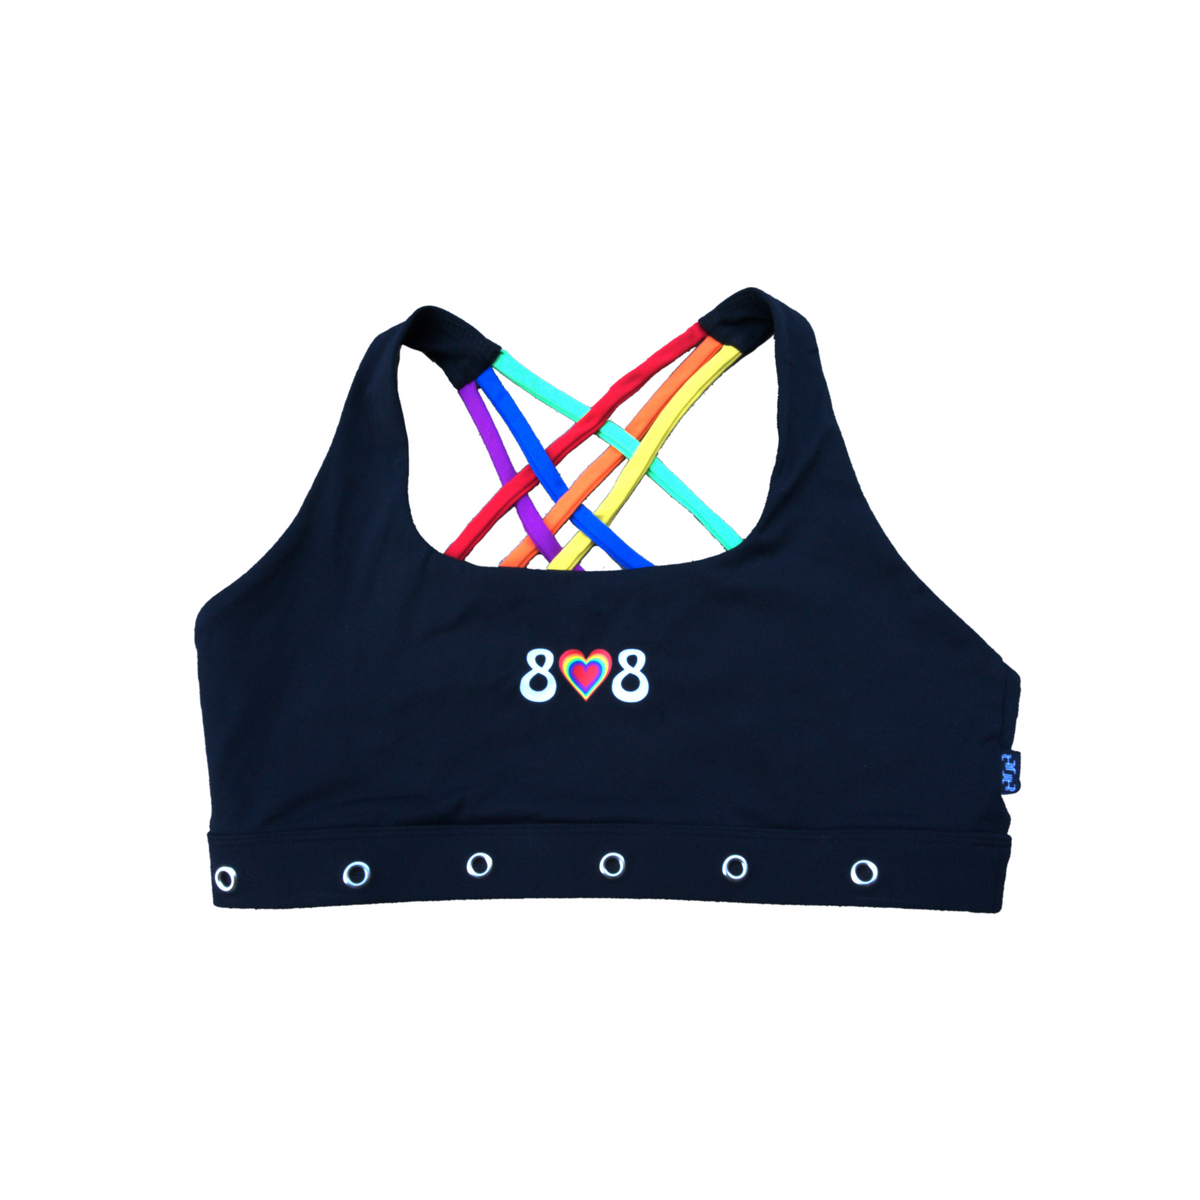 808 Pride Collection: Rainbow Gym Top